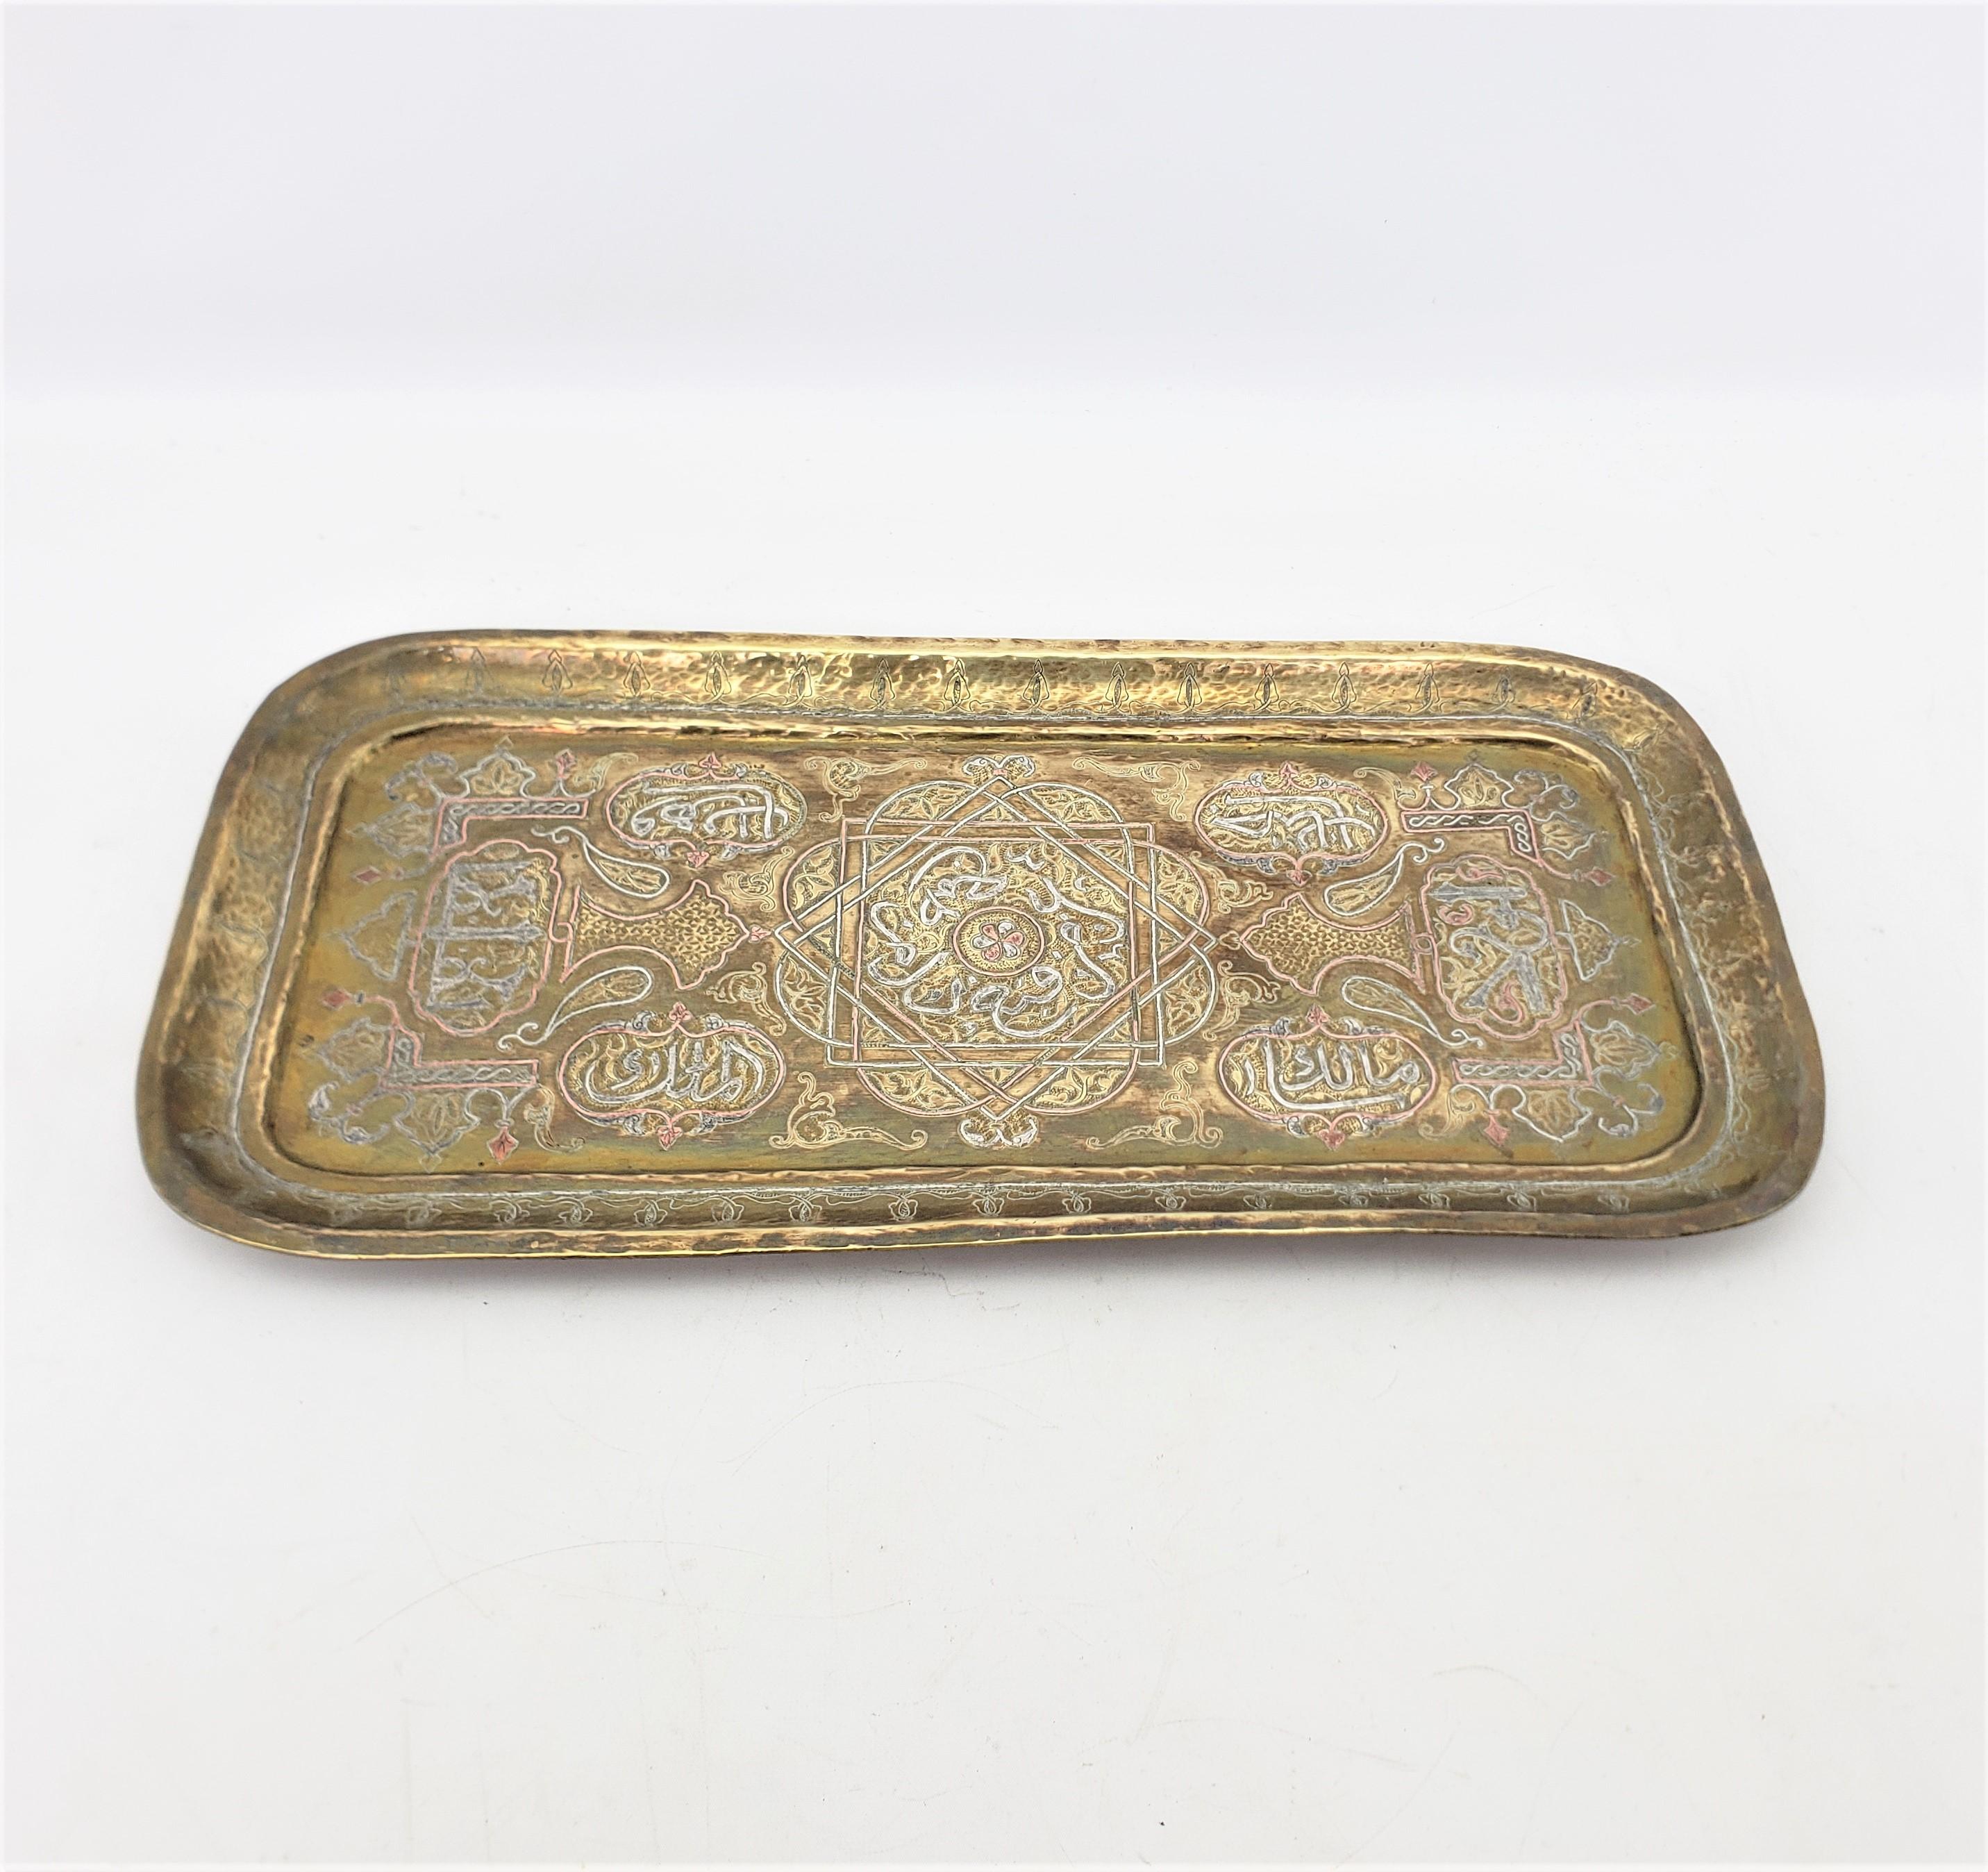 Antique Anglo-Indian Hand-Crafted Brass Serving Tray with Copper & Silver Decor In Good Condition For Sale In Hamilton, Ontario